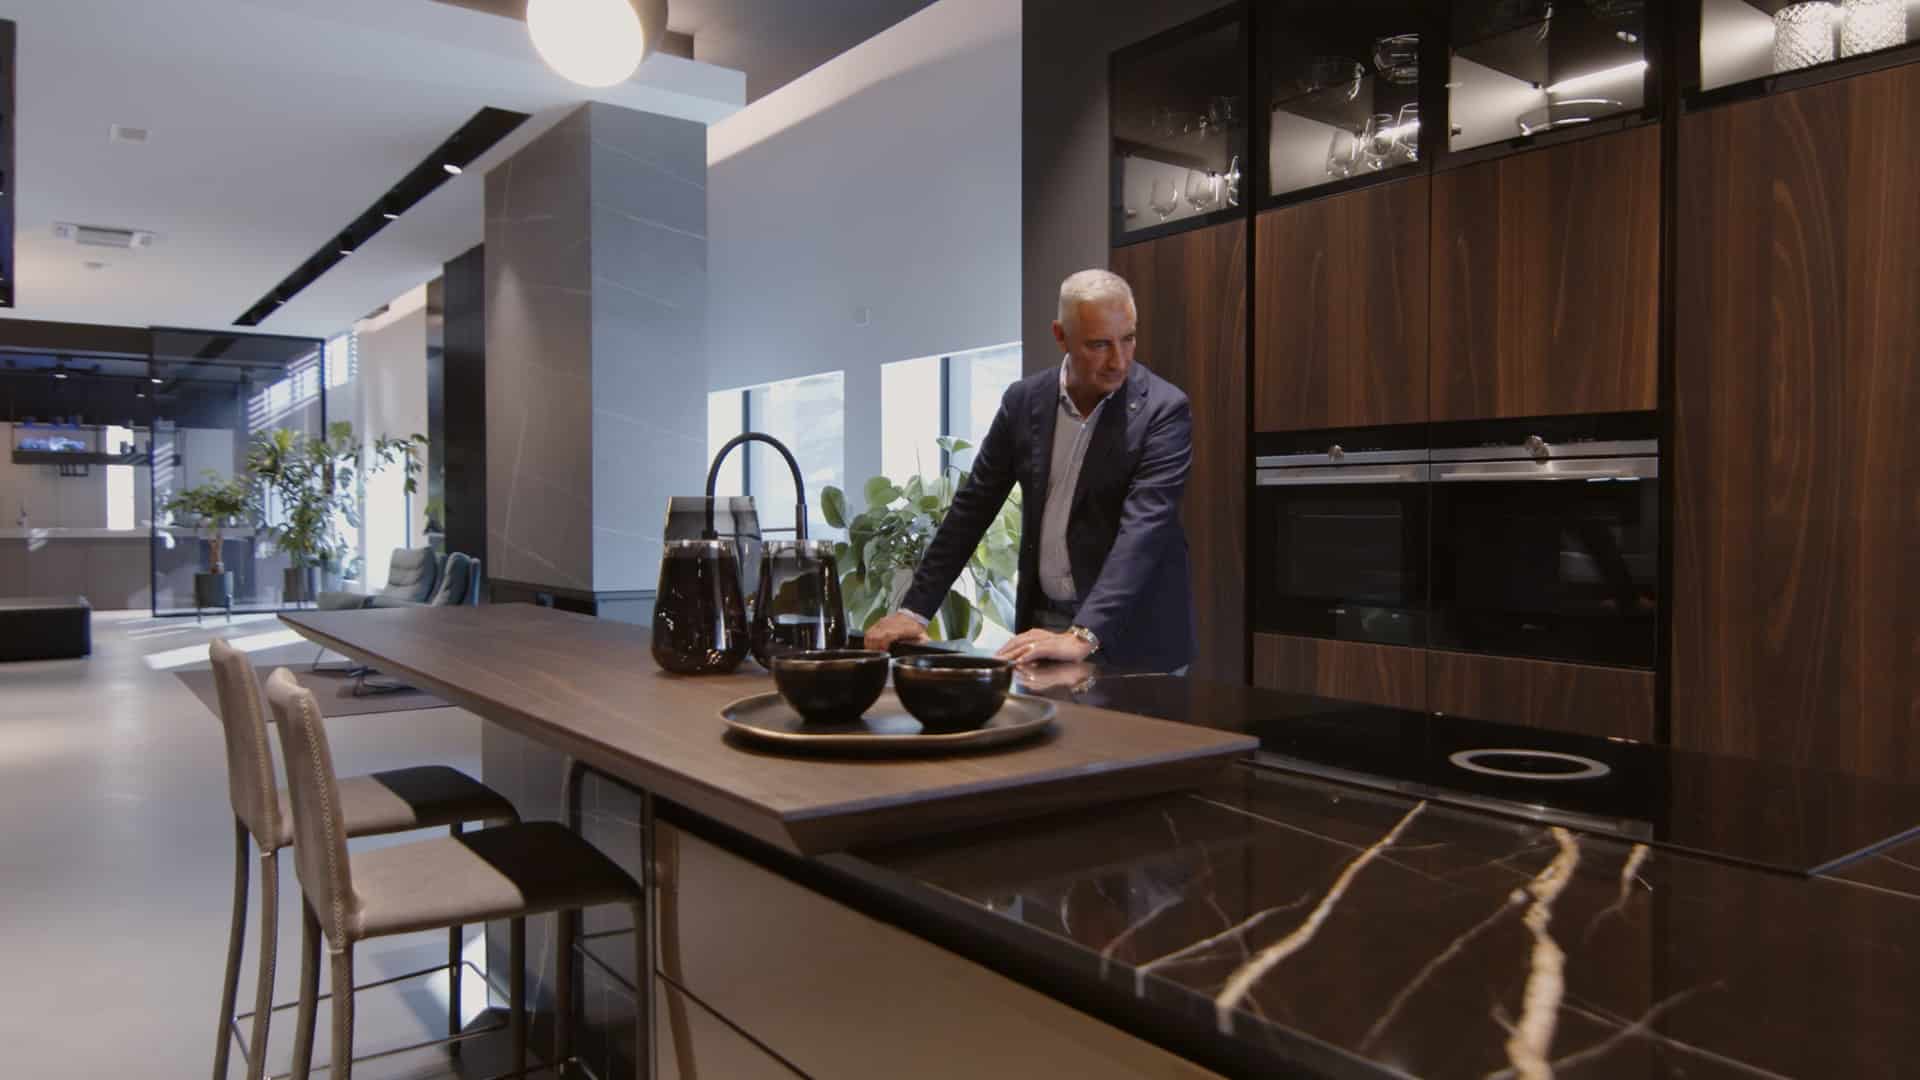 Philip Cellier, CEO of Armony Cucine, presents us his path since he met Armony, coming to his vision of how to interpret the future.